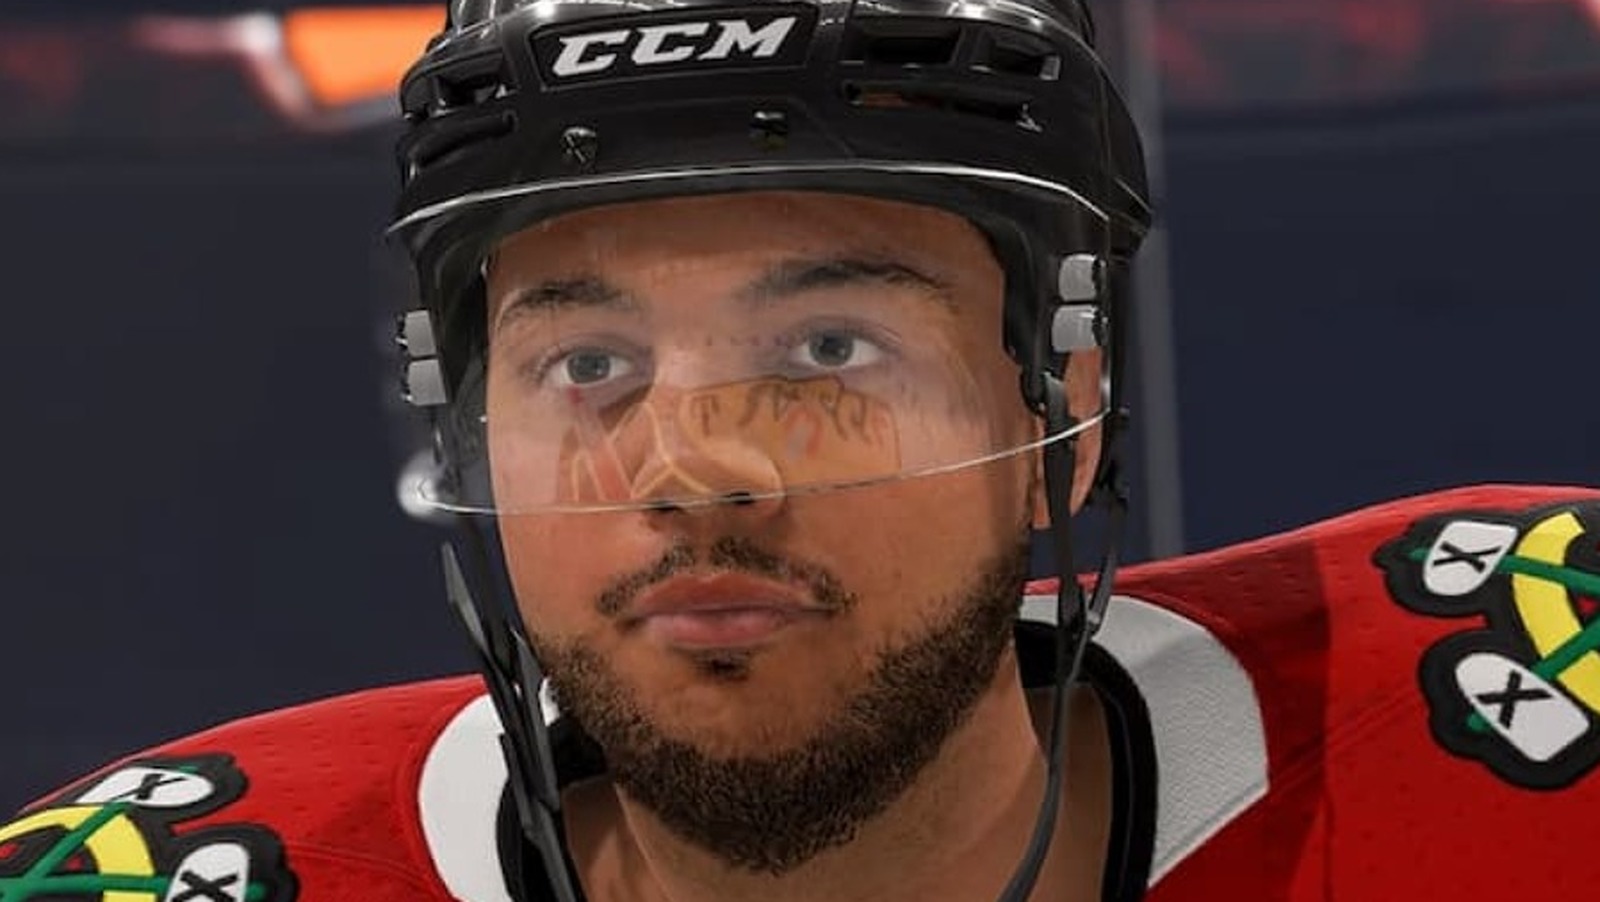 NHL 19' Release Date, Cover Athlete, New Modes, Pre-Order Details